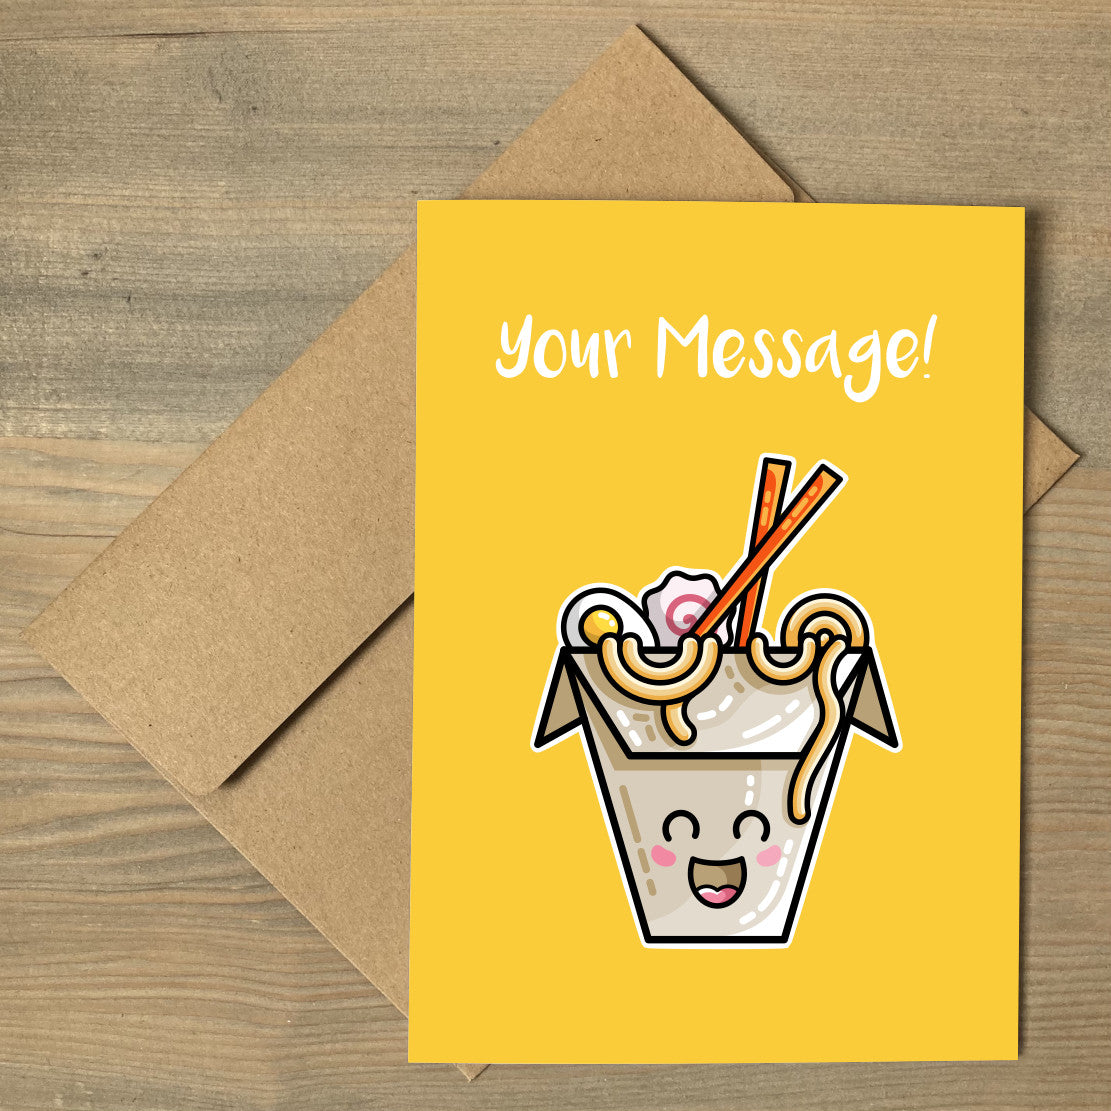 A yellow greeting card lying flat on a brown envelope, with a design of a kawaii cute takeaway box of ramen noodles and chopsticks with a personalised message above